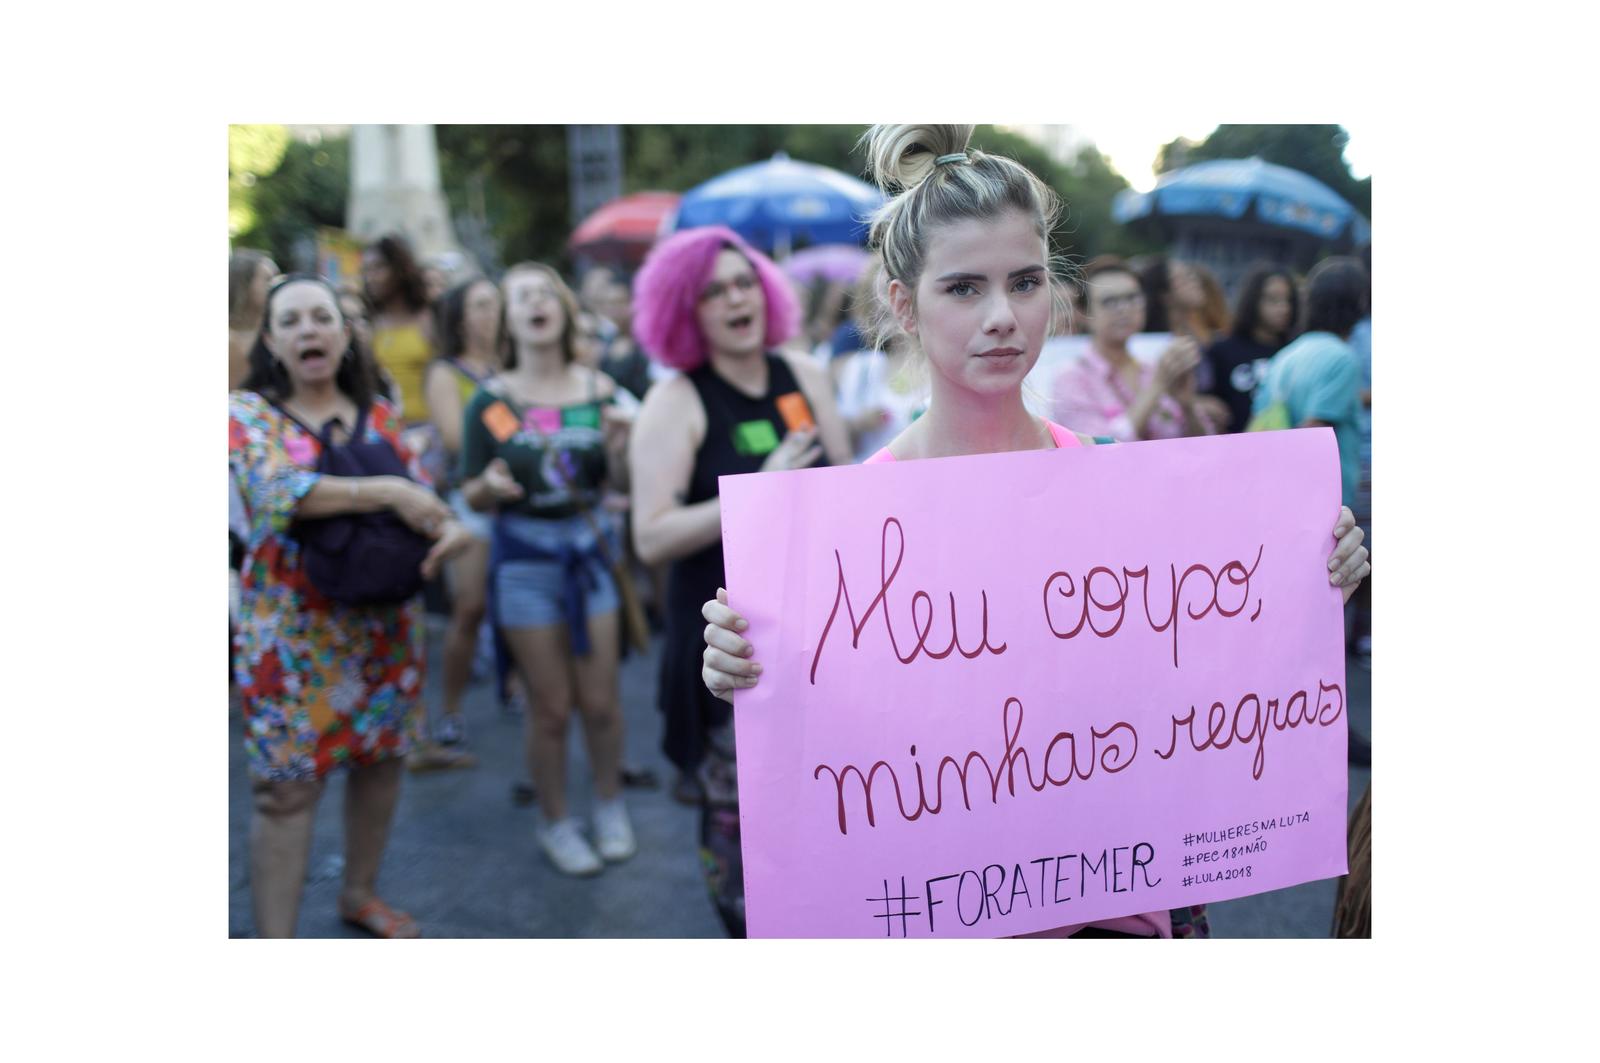 Protesters demonstrate against Brazil’s congressional move to criminalize all cases of abortion, including cases of rape and where the mother’s life is in danger, in Rio de Janeiro